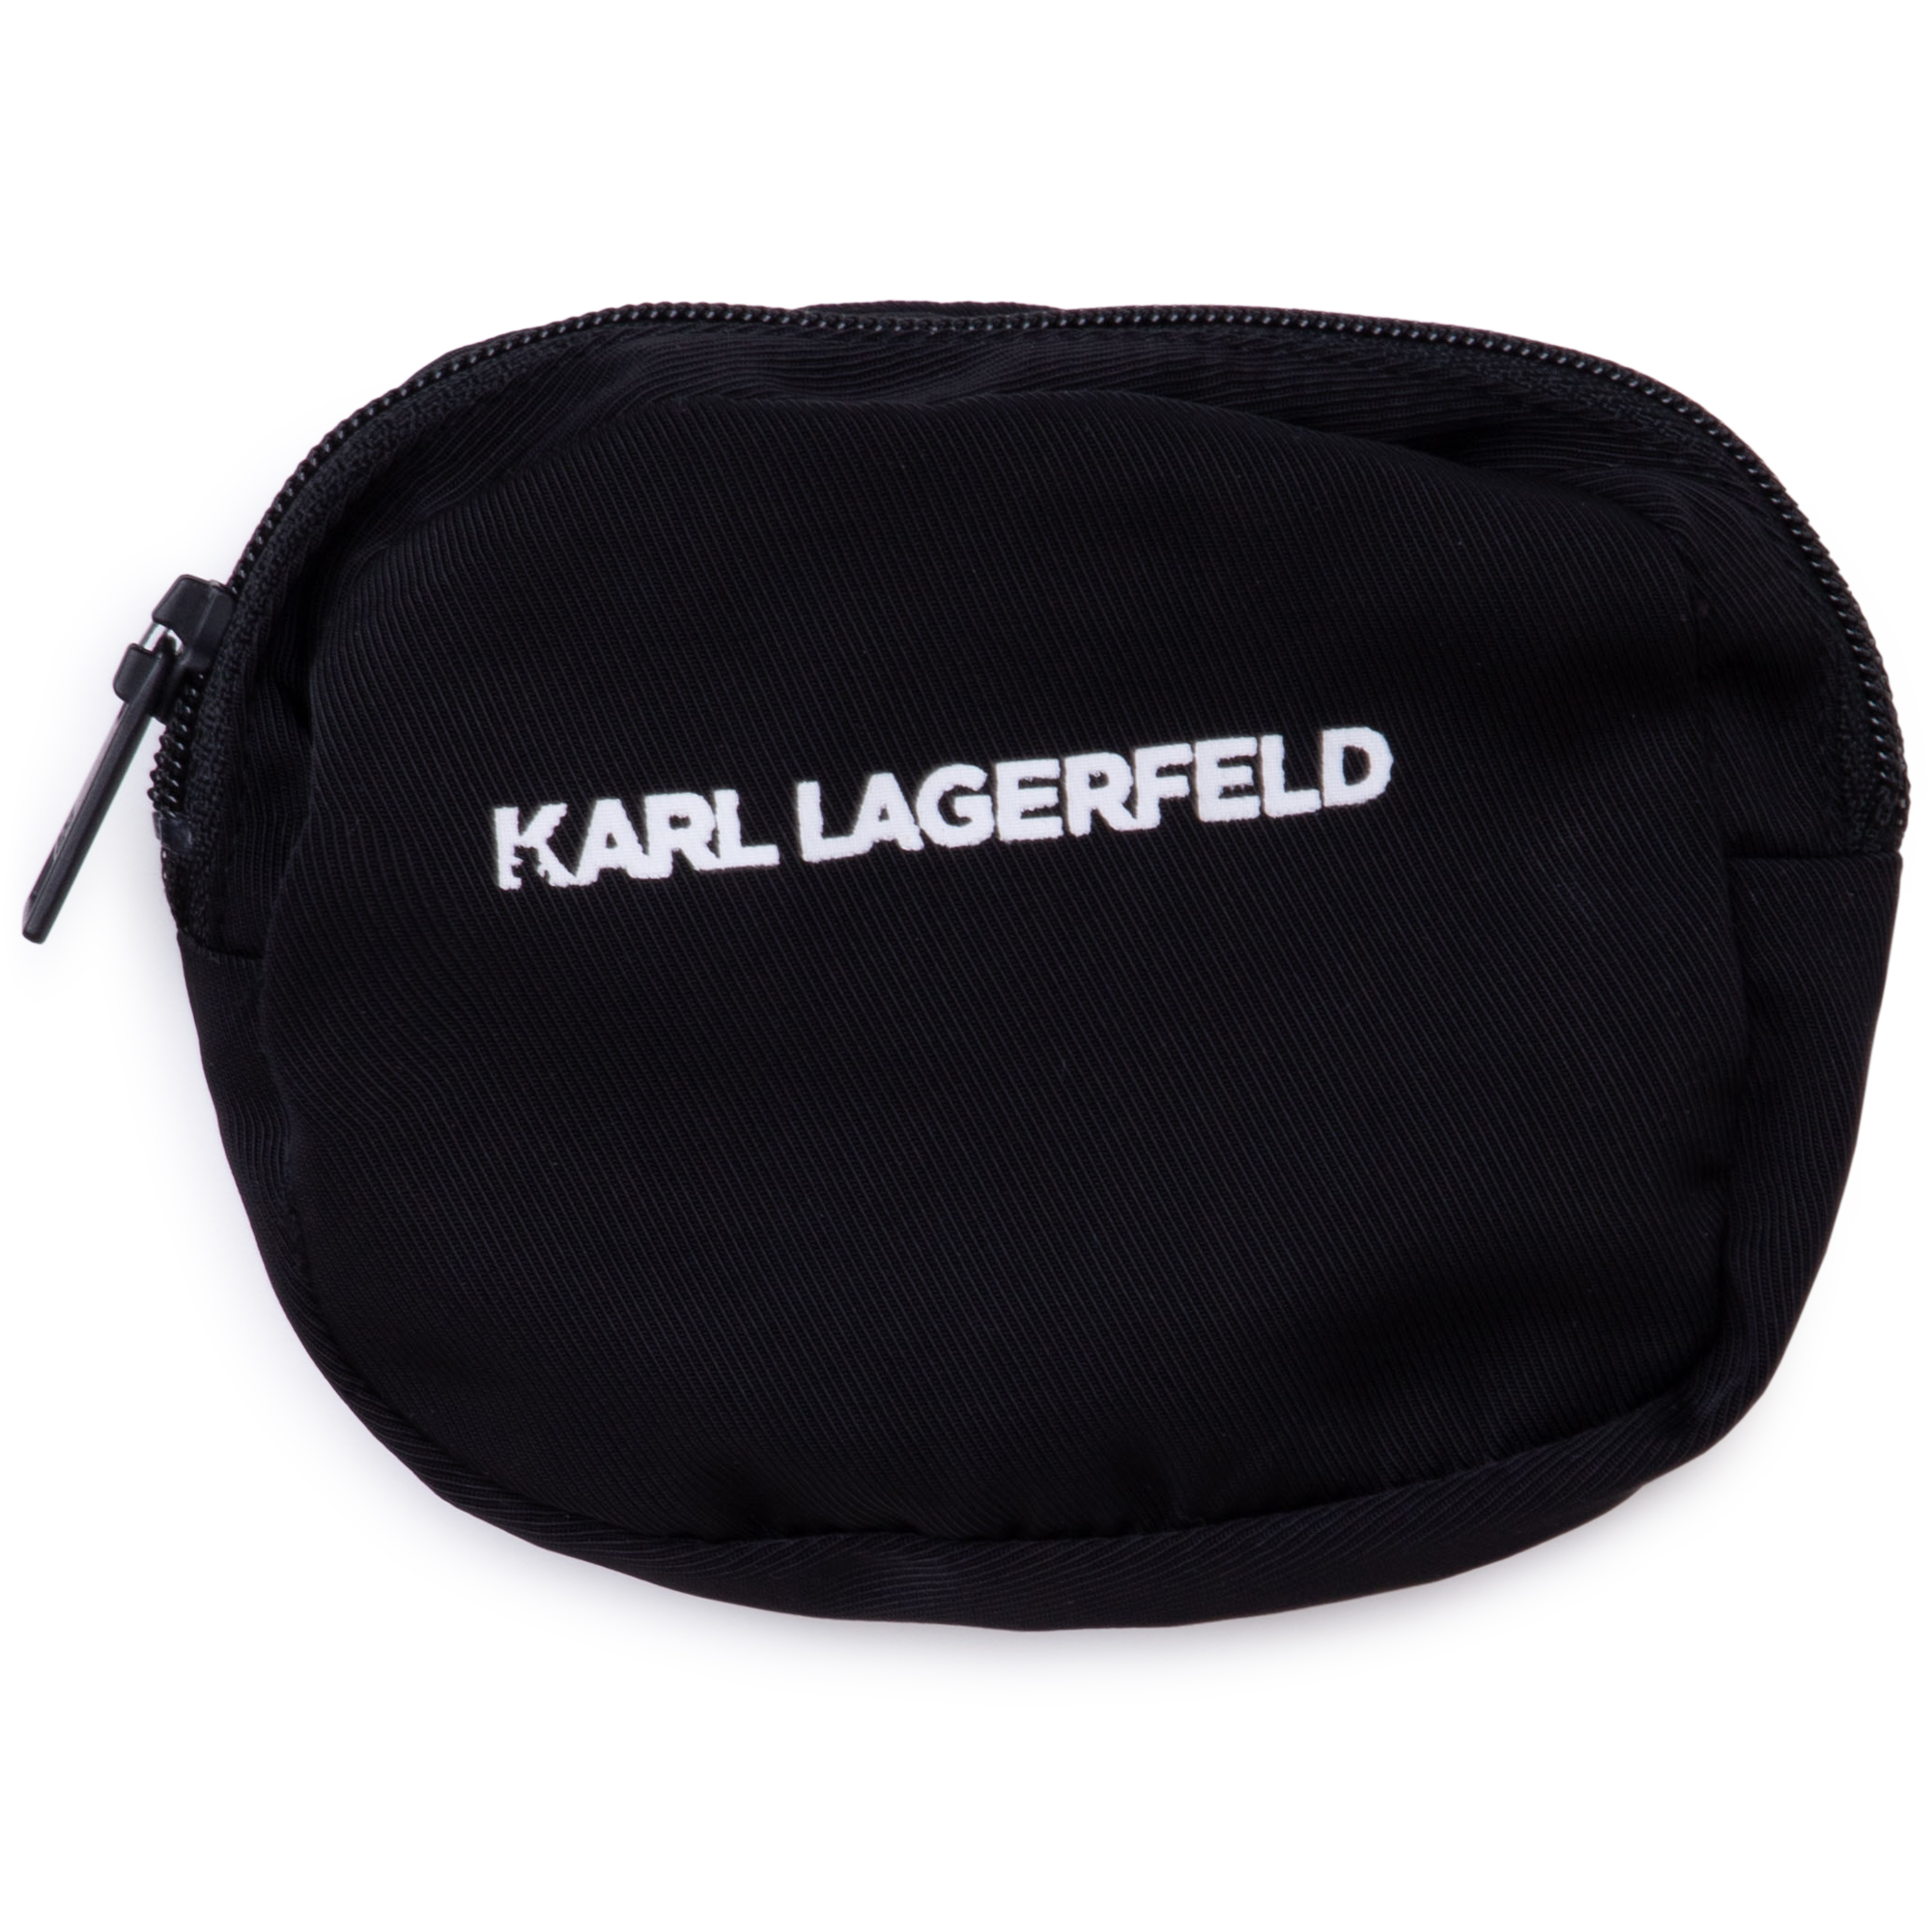 Sweatshirt with pouch KARL LAGERFELD KIDS for GIRL